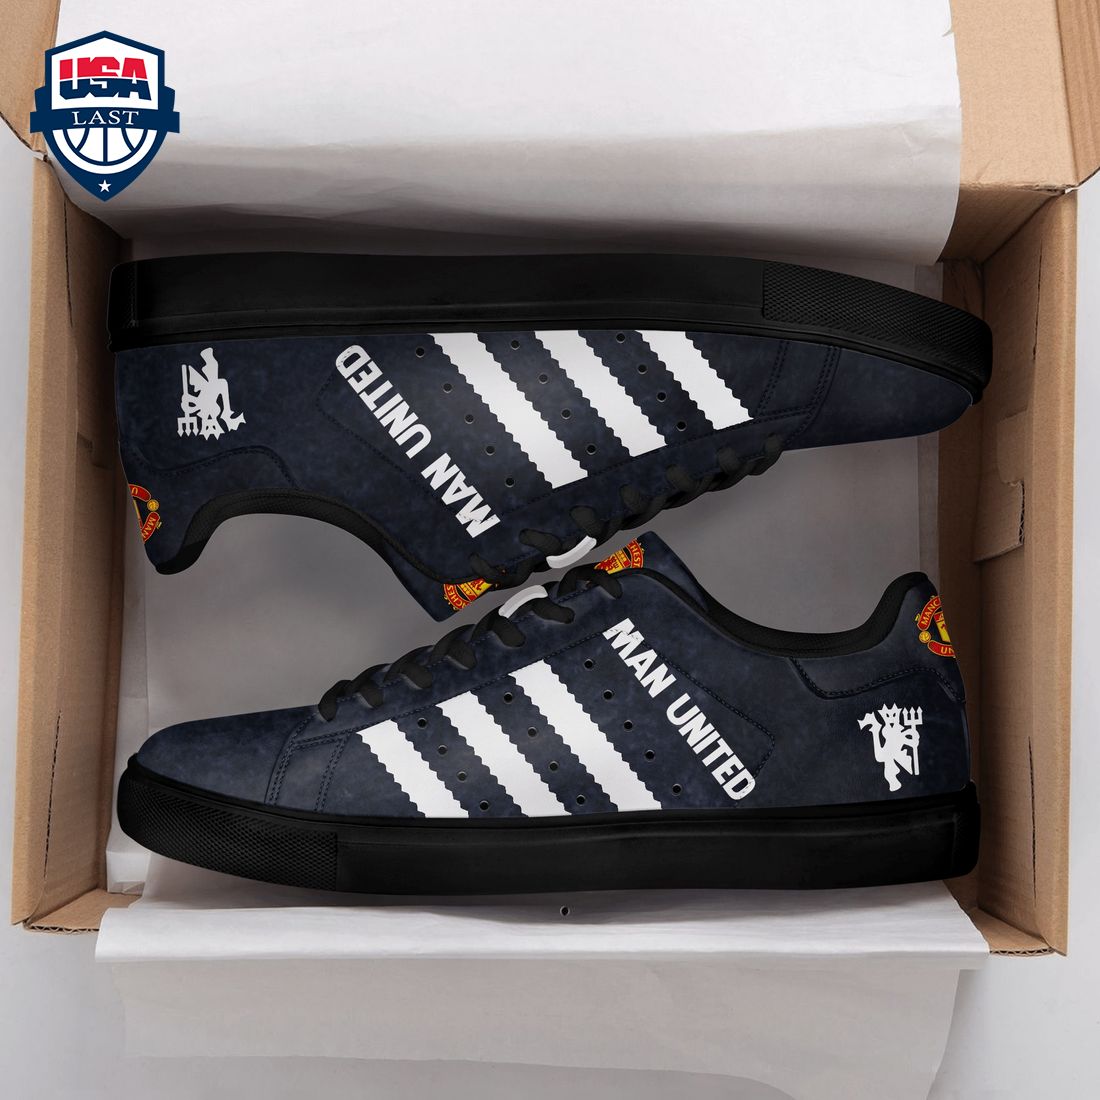 manchester-united-fc-white-stripes-style-4-stan-smith-low-top-shoes-1-OnSzI.jpg